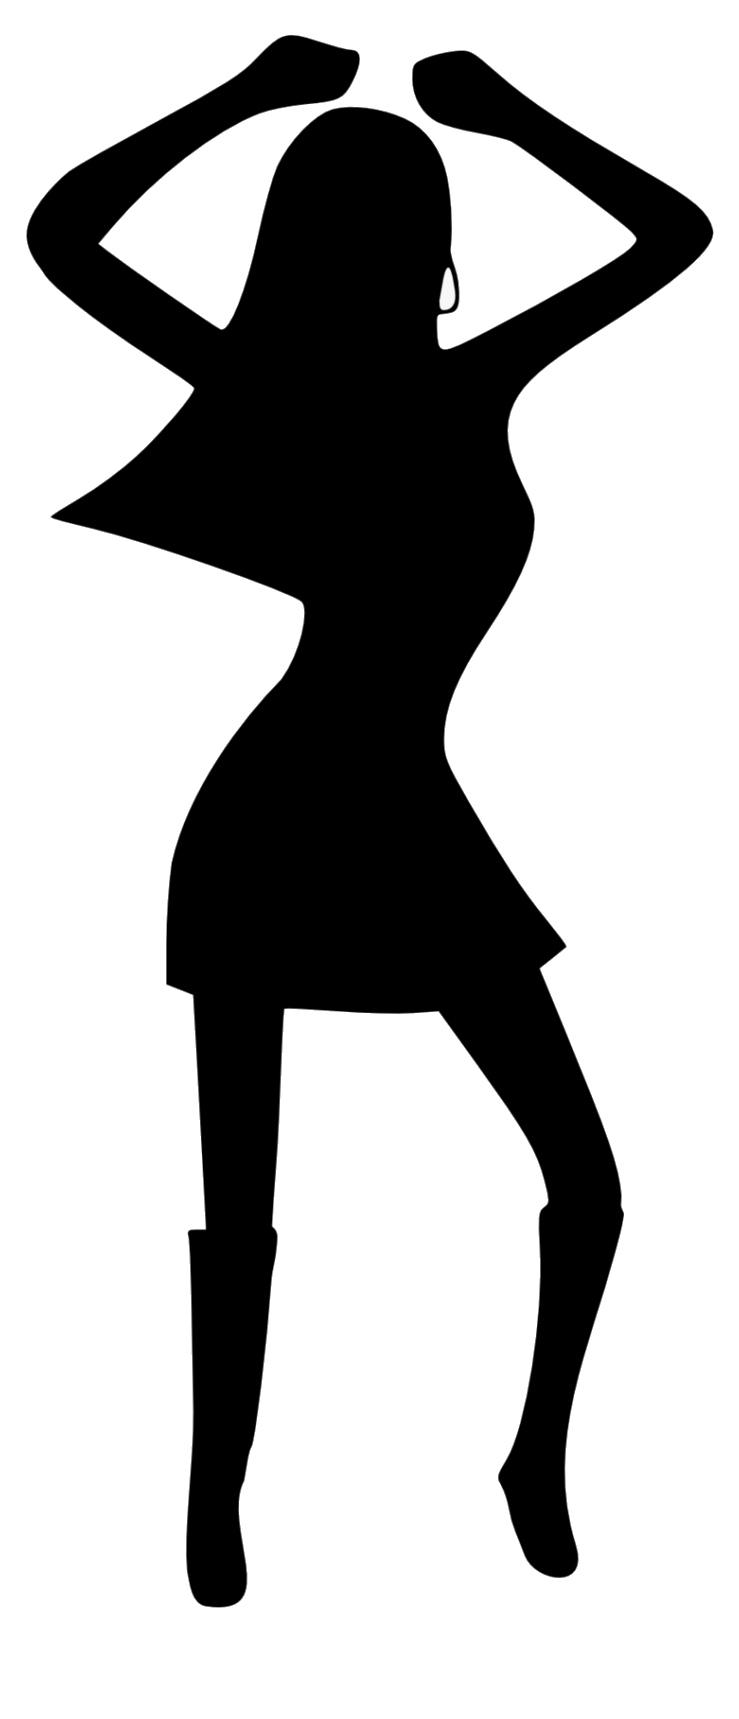 A silhouette of a woman dancing